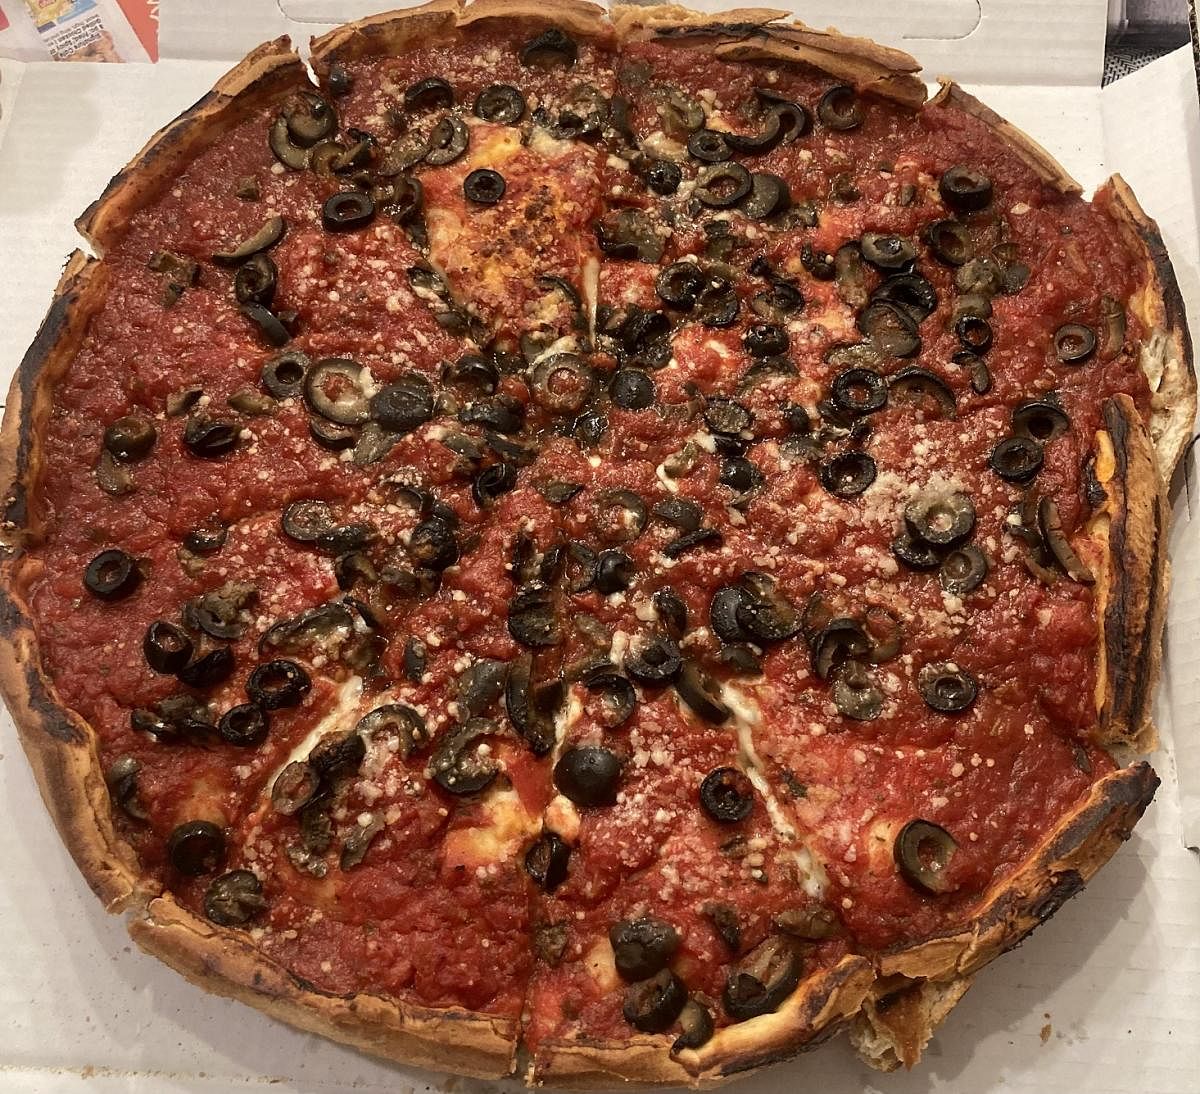 Deep-dish pizza topped with olives. PHOTOS BY AUTHOR